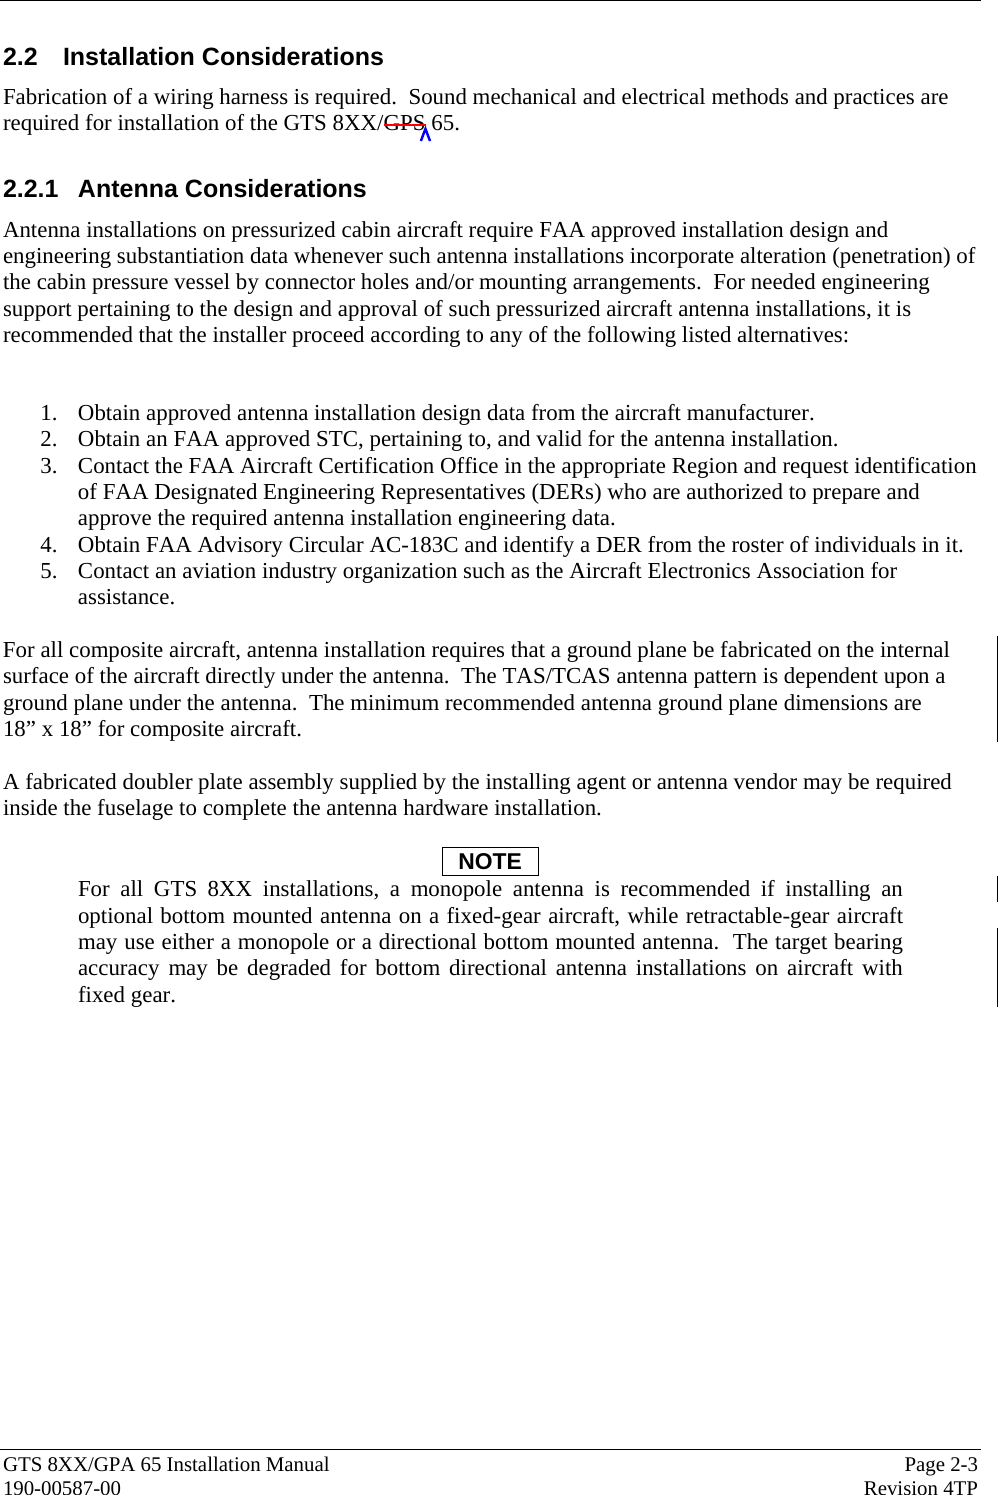  GTS 8XX/GPA 65 Installation Manual  Page 2-3 190-00587-00  Revision 4TP 2.2 Installation Considerations Fabrication of a wiring harness is required.  Sound mechanical and electrical methods and practices are required for installation of the GTS 8XX/GPS 65.  2.2.1 Antenna Considerations Antenna installations on pressurized cabin aircraft require FAA approved installation design and engineering substantiation data whenever such antenna installations incorporate alteration (penetration) of the cabin pressure vessel by connector holes and/or mounting arrangements.  For needed engineering support pertaining to the design and approval of such pressurized aircraft antenna installations, it is recommended that the installer proceed according to any of the following listed alternatives:  1. Obtain approved antenna installation design data from the aircraft manufacturer. 2. Obtain an FAA approved STC, pertaining to, and valid for the antenna installation. 3. Contact the FAA Aircraft Certification Office in the appropriate Region and request identification of FAA Designated Engineering Representatives (DERs) who are authorized to prepare and approve the required antenna installation engineering data. 4. Obtain FAA Advisory Circular AC-183C and identify a DER from the roster of individuals in it. 5. Contact an aviation industry organization such as the Aircraft Electronics Association for assistance.  For all composite aircraft, antenna installation requires that a ground plane be fabricated on the internal surface of the aircraft directly under the antenna.  The TAS/TCAS antenna pattern is dependent upon a ground plane under the antenna.  The minimum recommended antenna ground plane dimensions are  18” x 18” for composite aircraft.   A fabricated doubler plate assembly supplied by the installing agent or antenna vendor may be required inside the fuselage to complete the antenna hardware installation.  NOTE For all GTS 8XX installations, a monopole antenna is recommended if installing an optional bottom mounted antenna on a fixed-gear aircraft, while retractable-gear aircraft may use either a monopole or a directional bottom mounted antenna.  The target bearing accuracy may be degraded for bottom directional antenna installations on aircraft with fixed gear. 